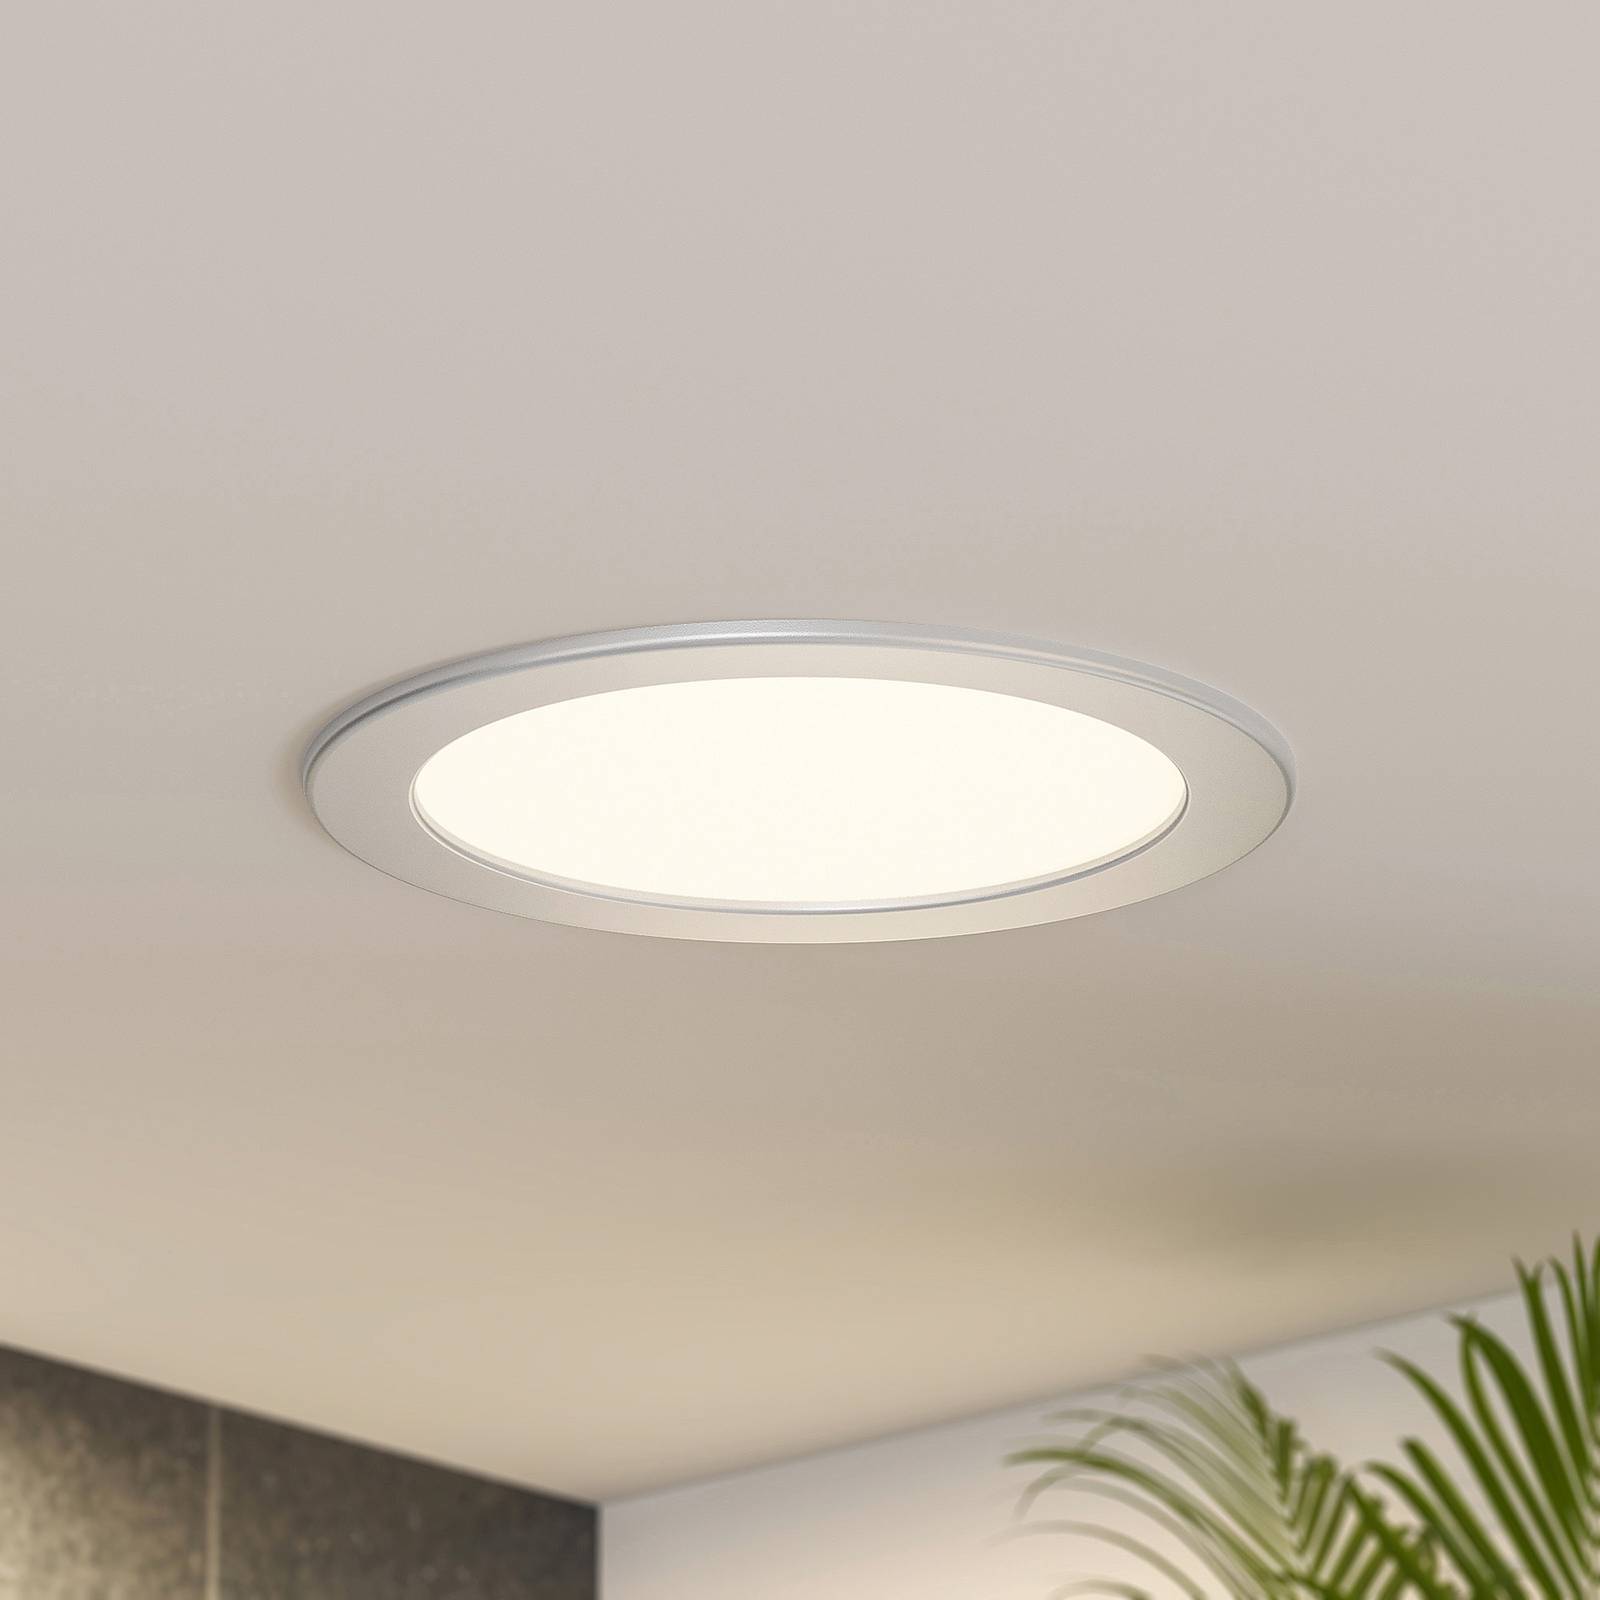 Prios Cadance LED-inbyggnadslampa silver 3-pack